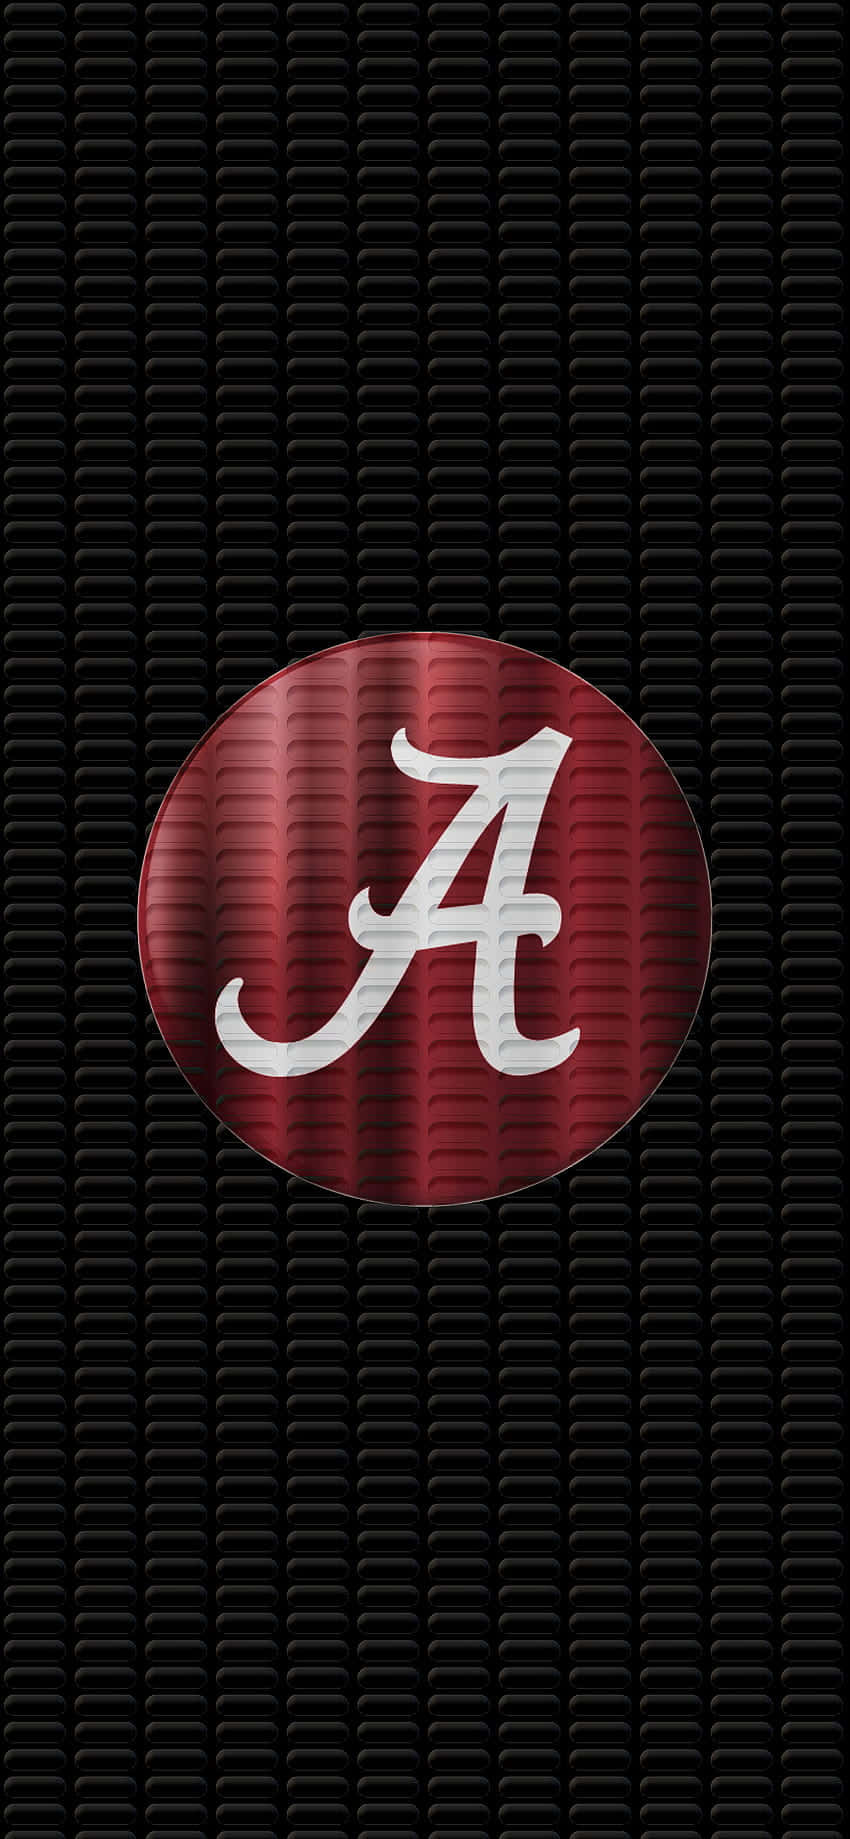 Crimson Tide Fans Get Ready For The Next Big Game With An Alabama Football Iphone Wallpaper